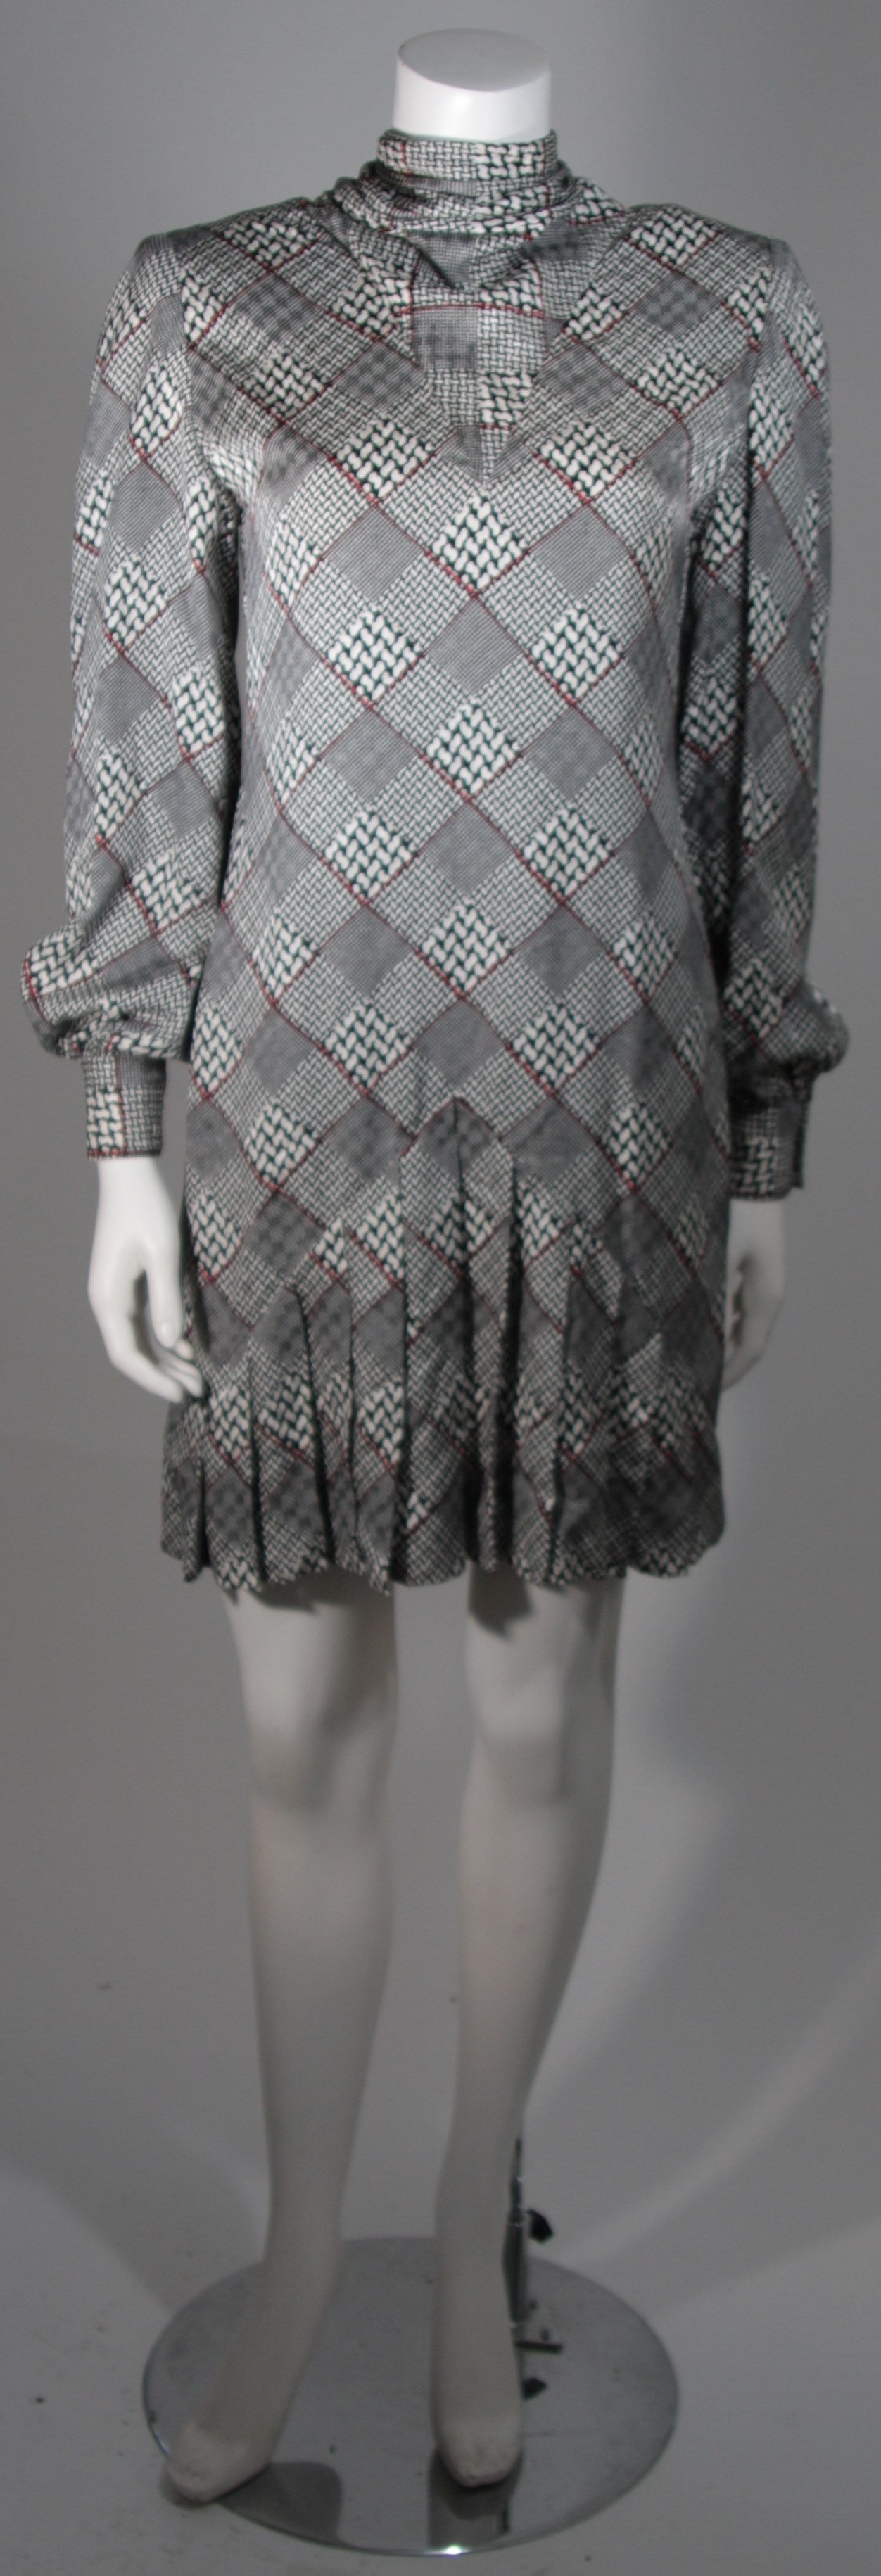 Galanos Couture Houndstooth Dress and Coat Ensemble Size 2 4 6 1